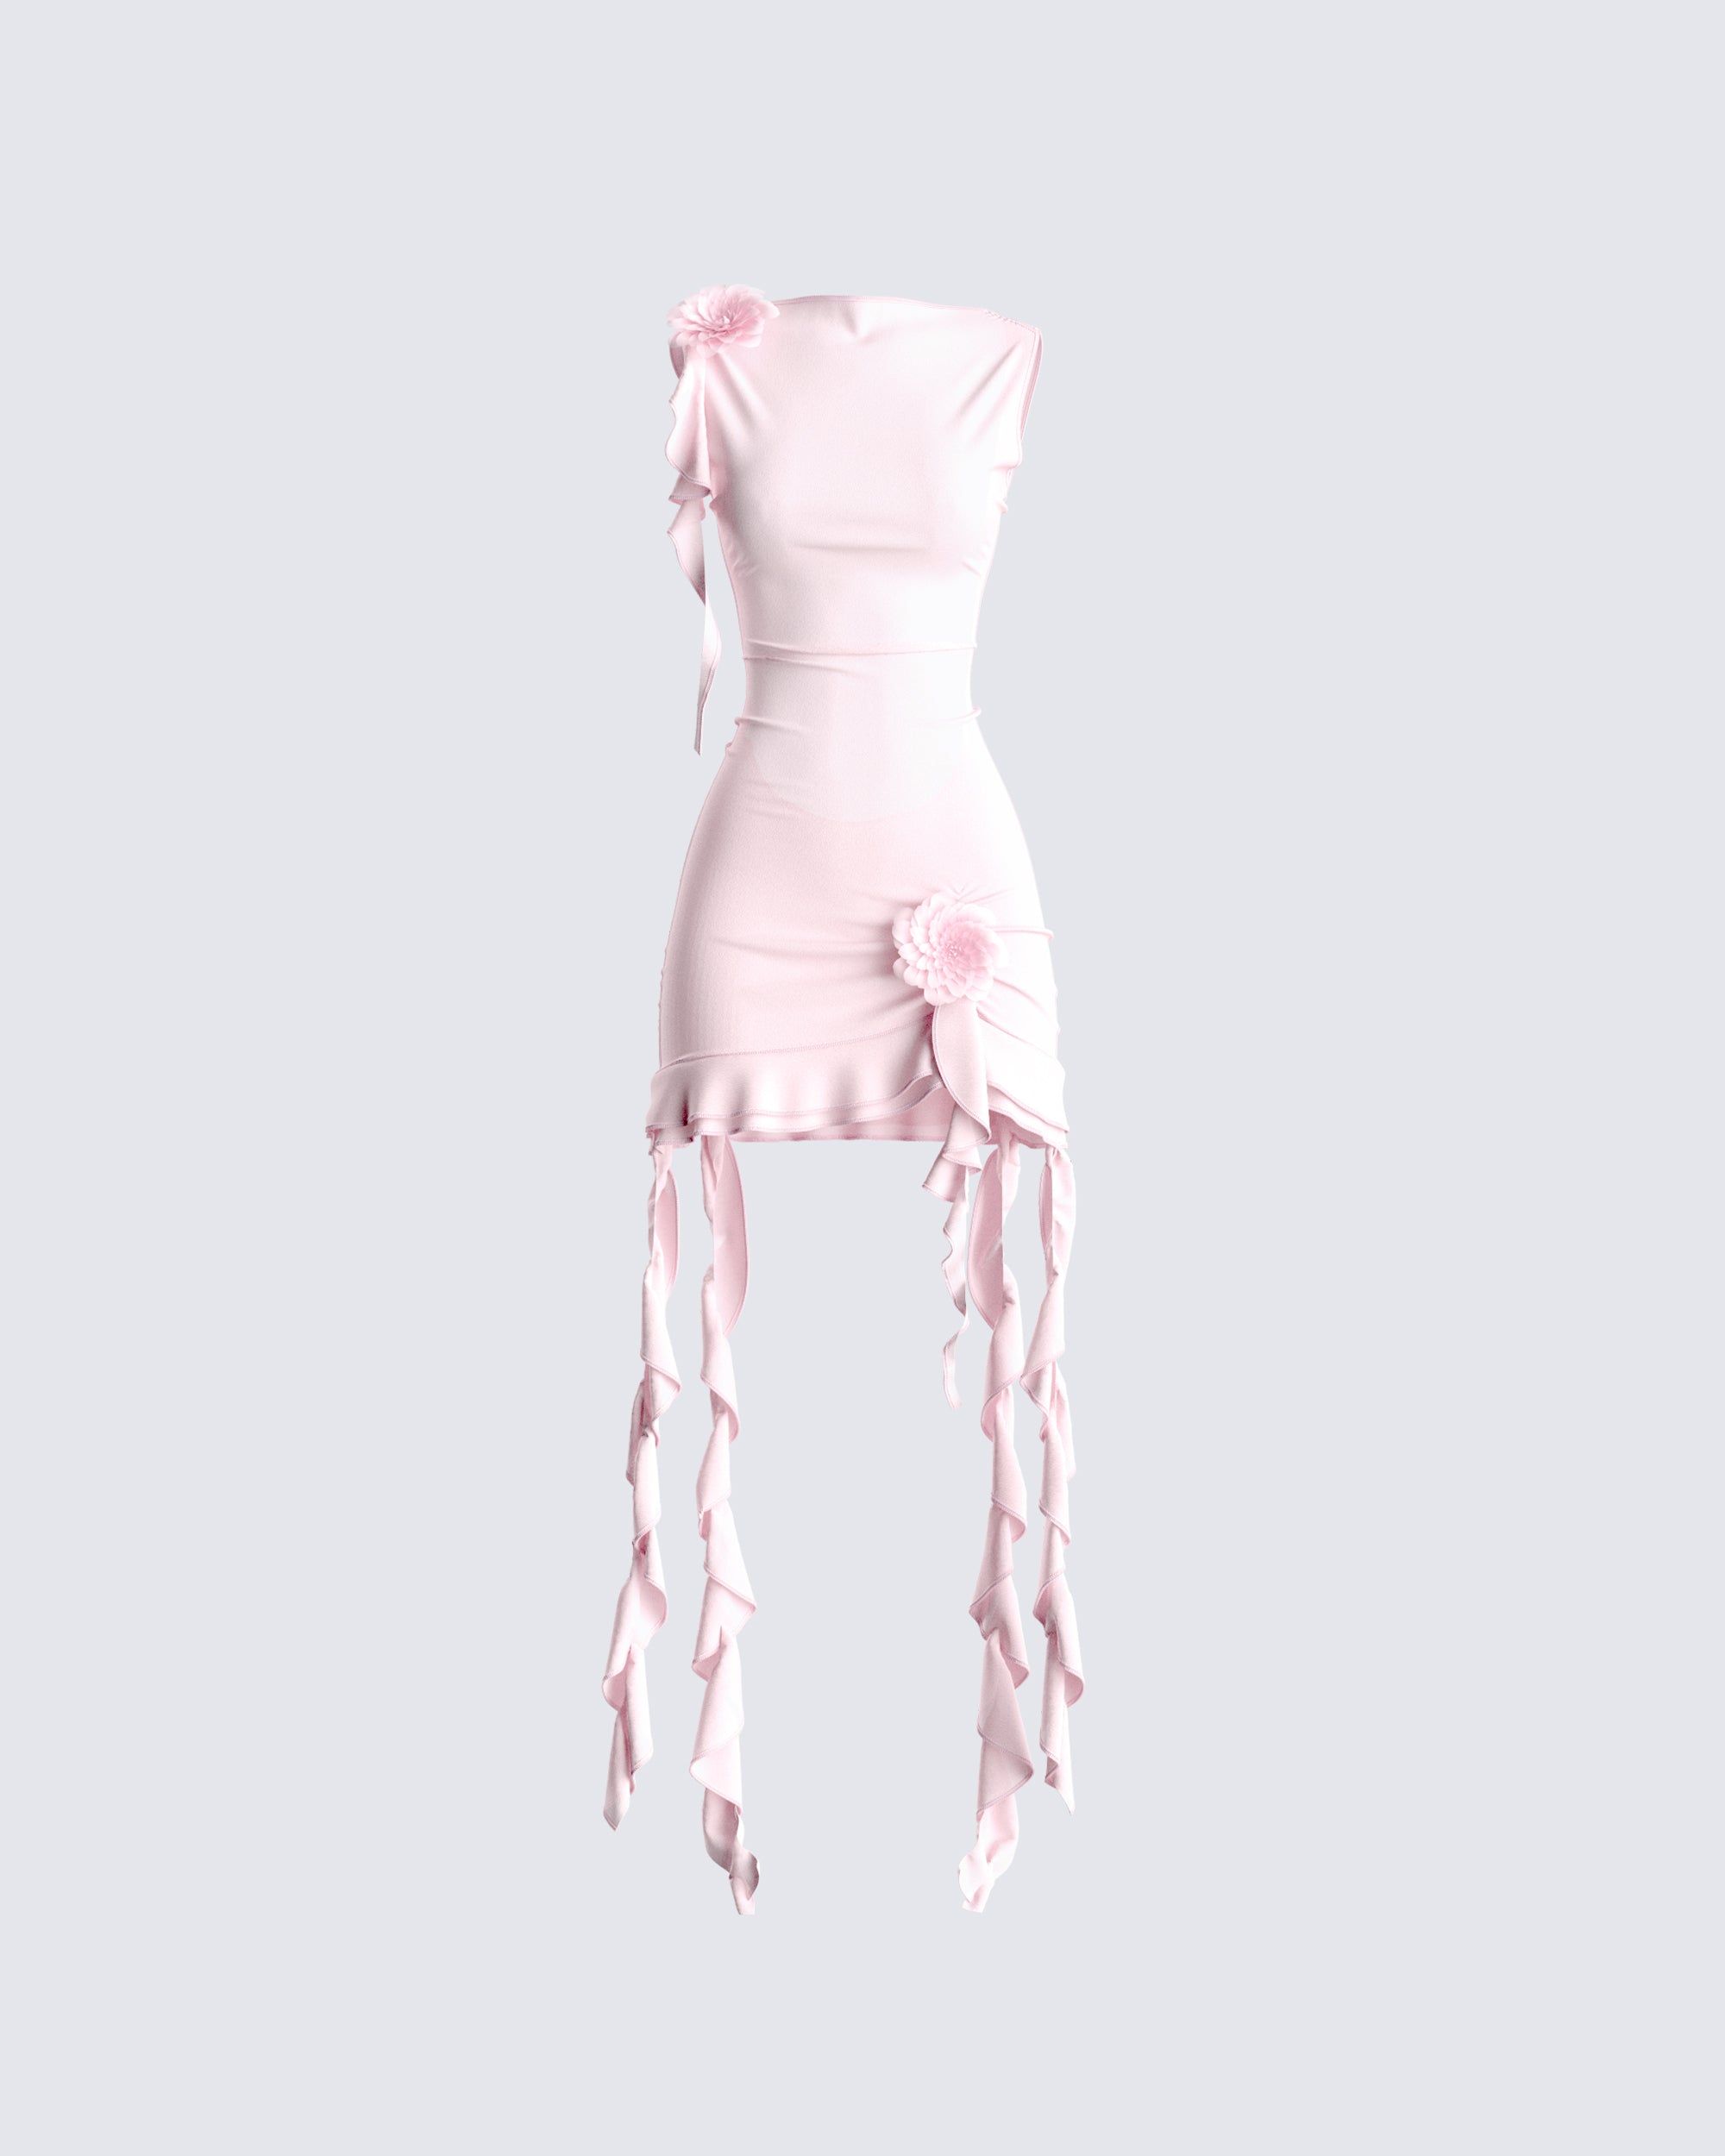 Glam up the women in you with a pink
dress